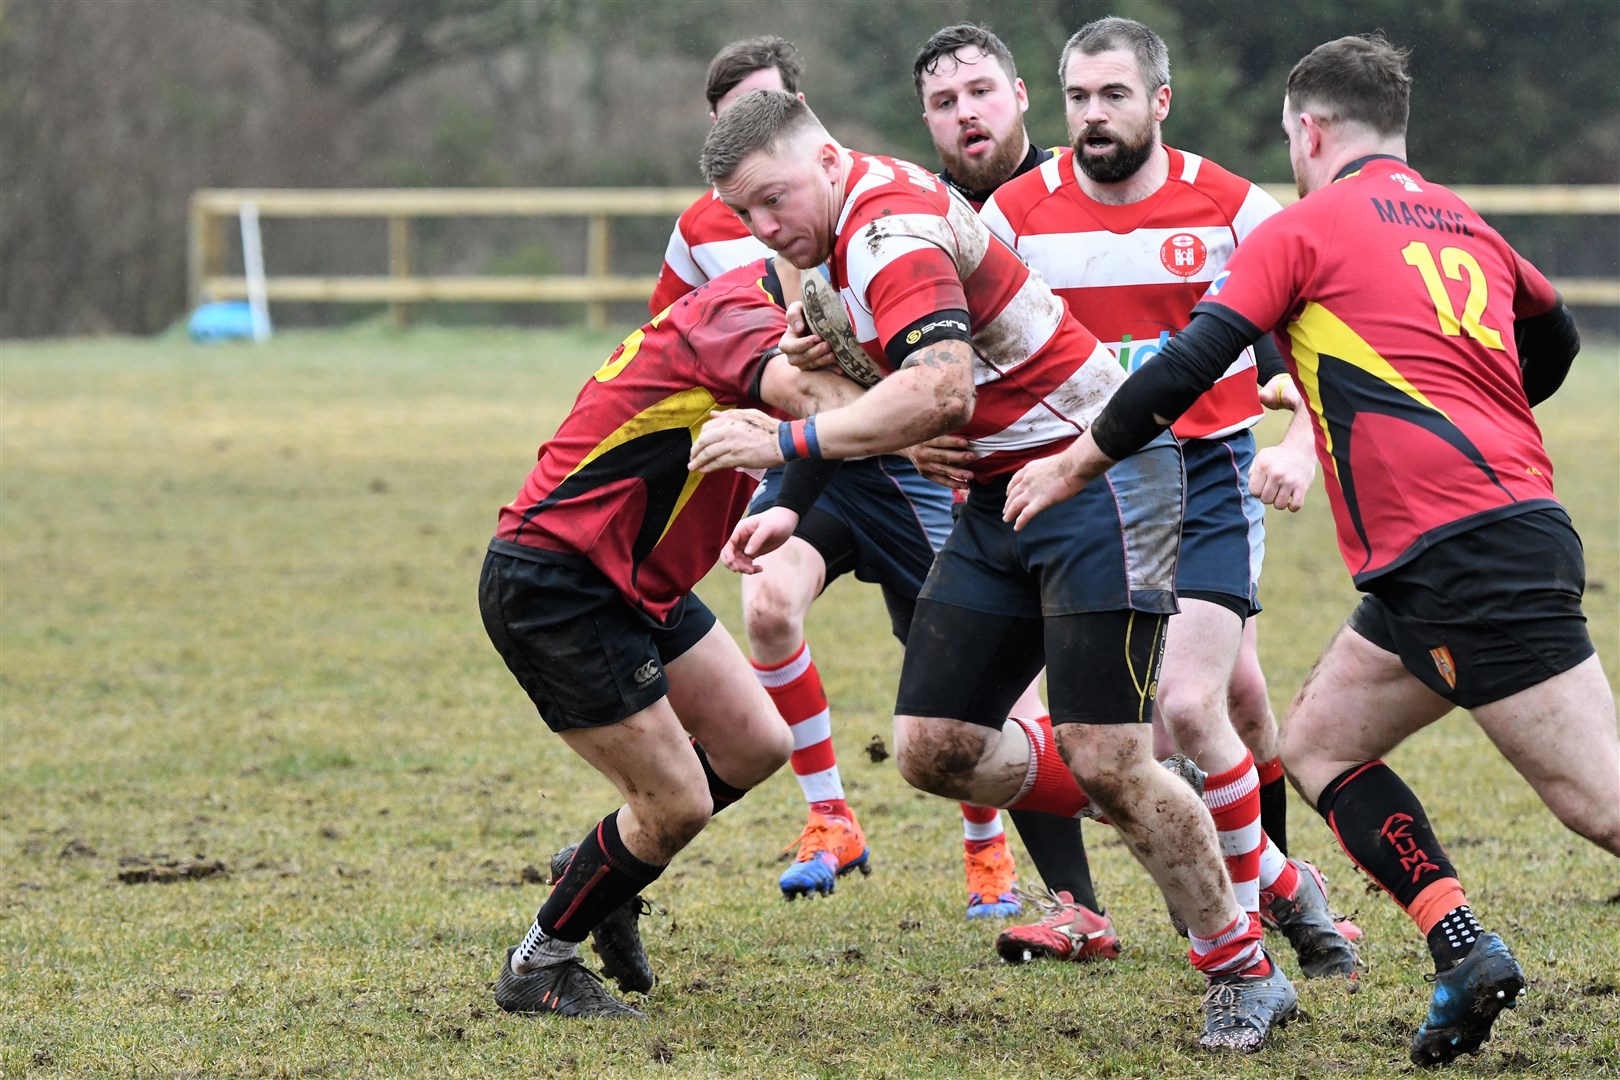 Moray Rugby Club had already completed their season, which has now been declared null-and-void